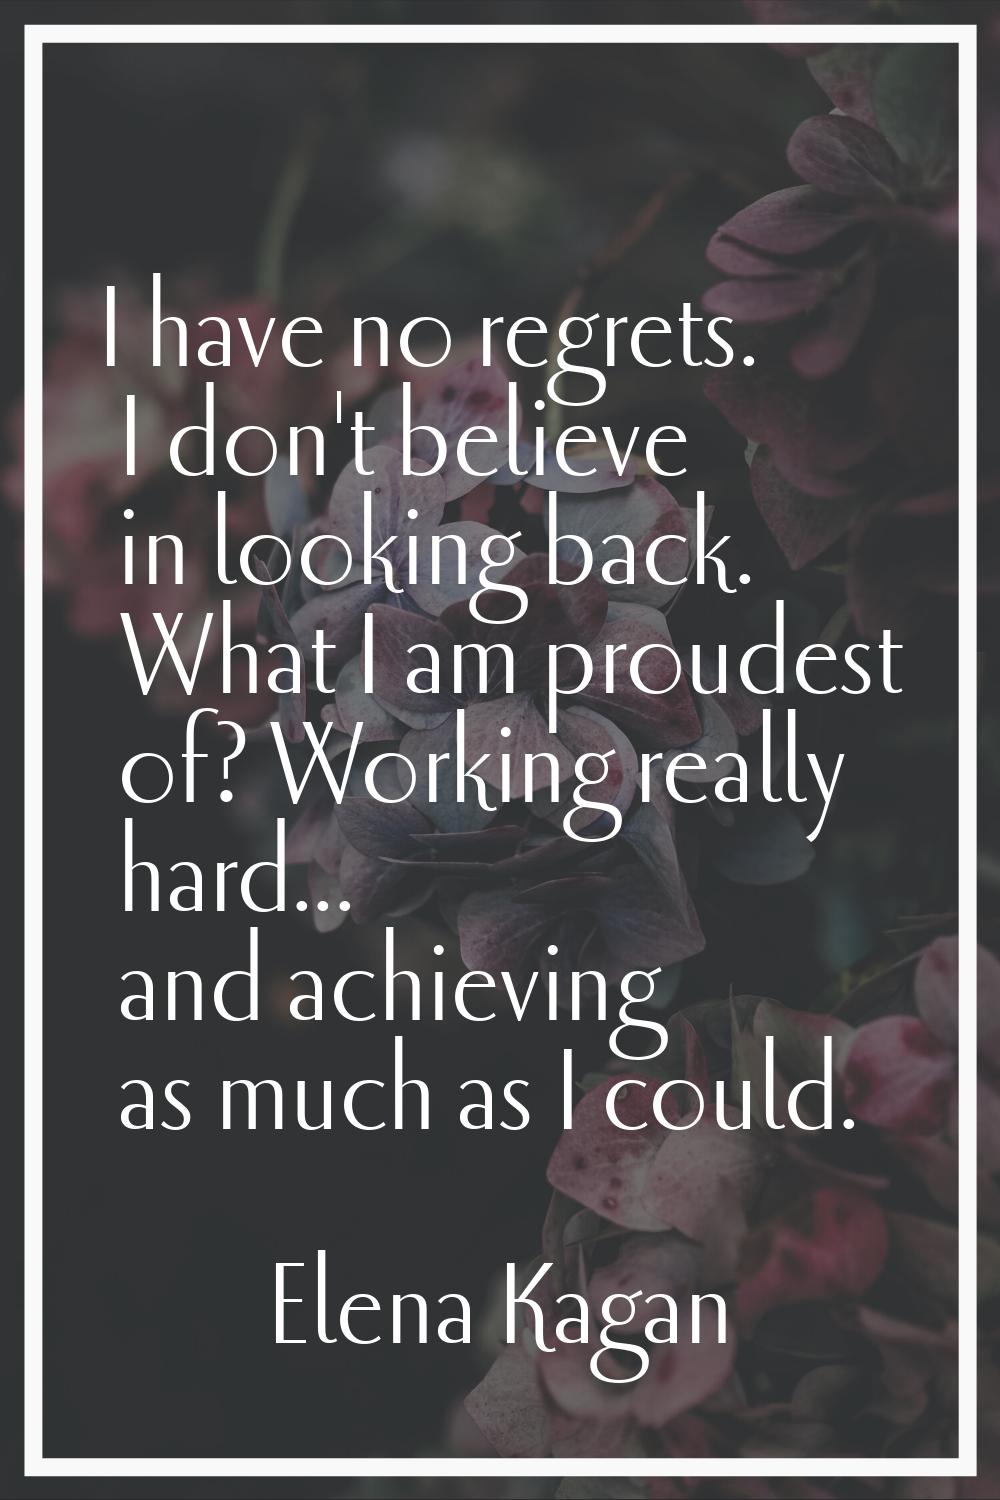 I have no regrets. I don't believe in looking back. What I am proudest of? Working really hard... a